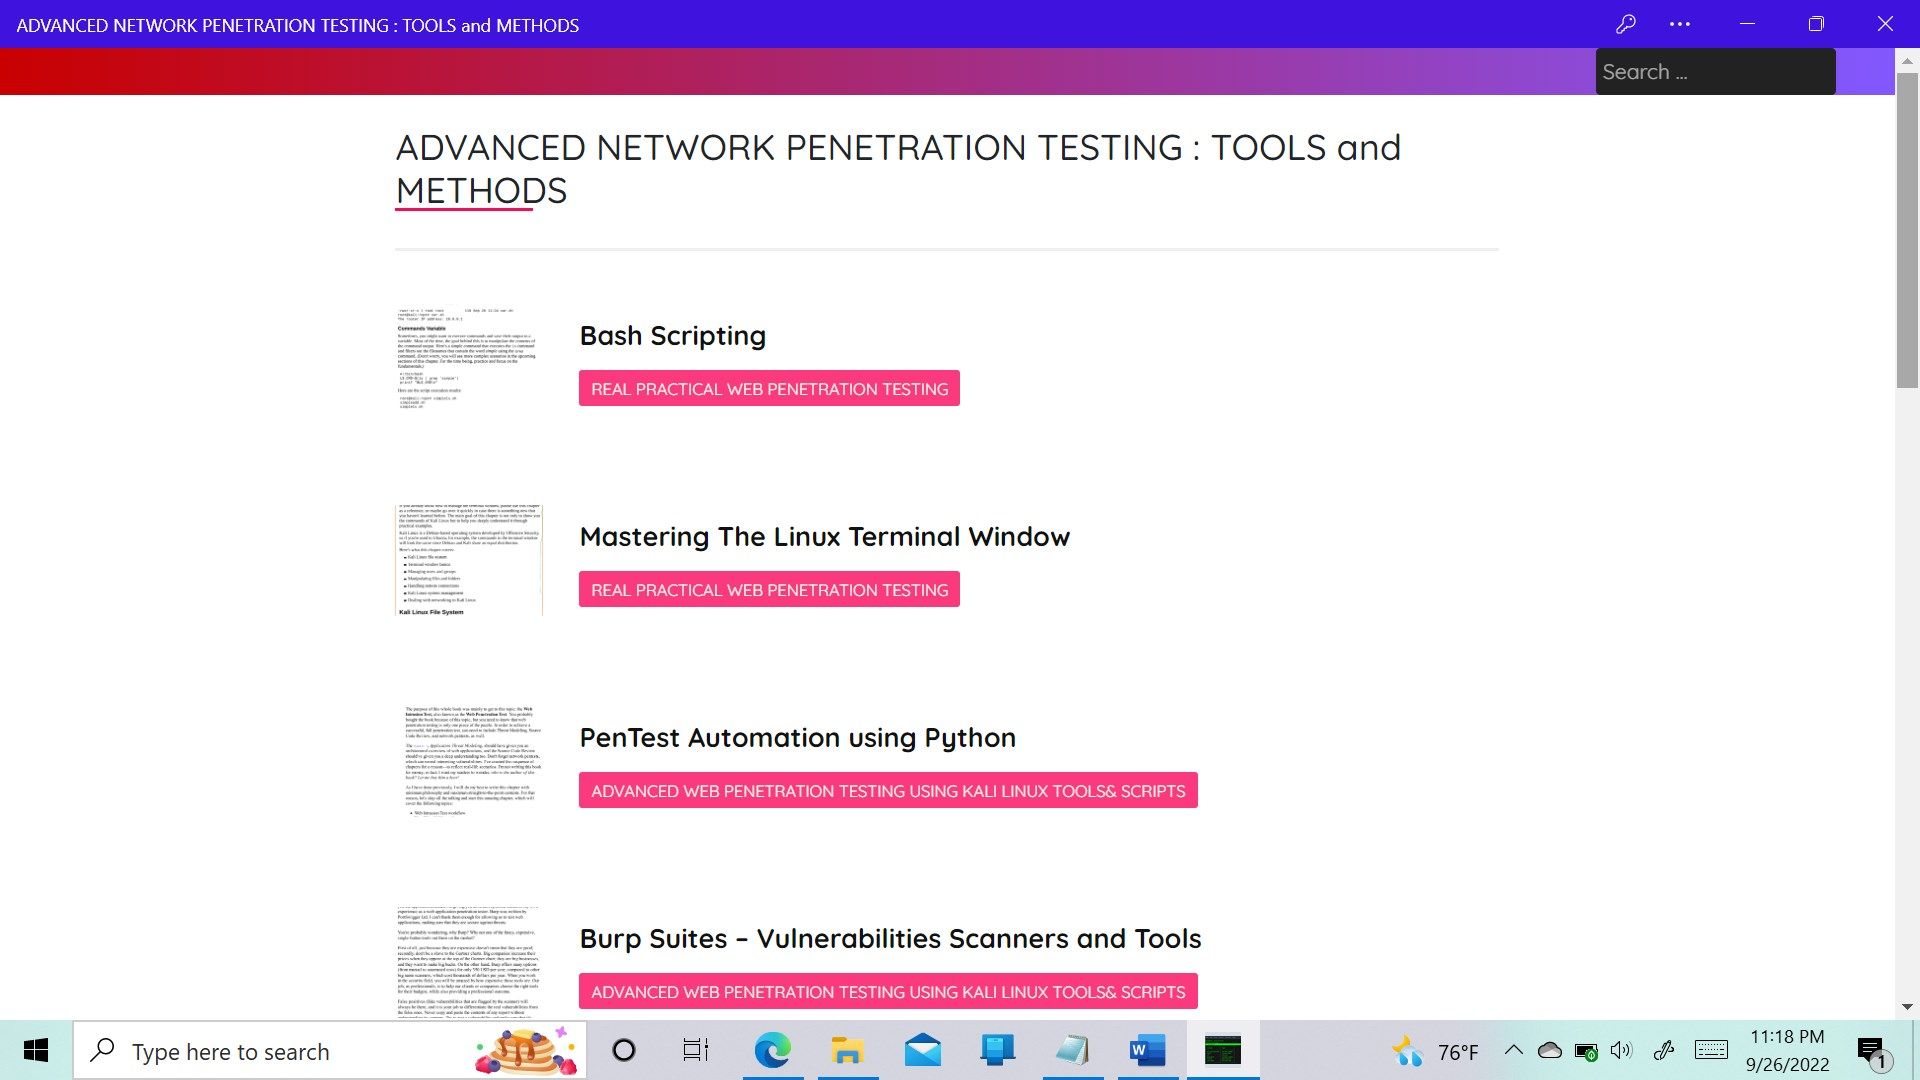 ADVANCED NETWORK PENETRATION TESTING : TOOLS and METHODS